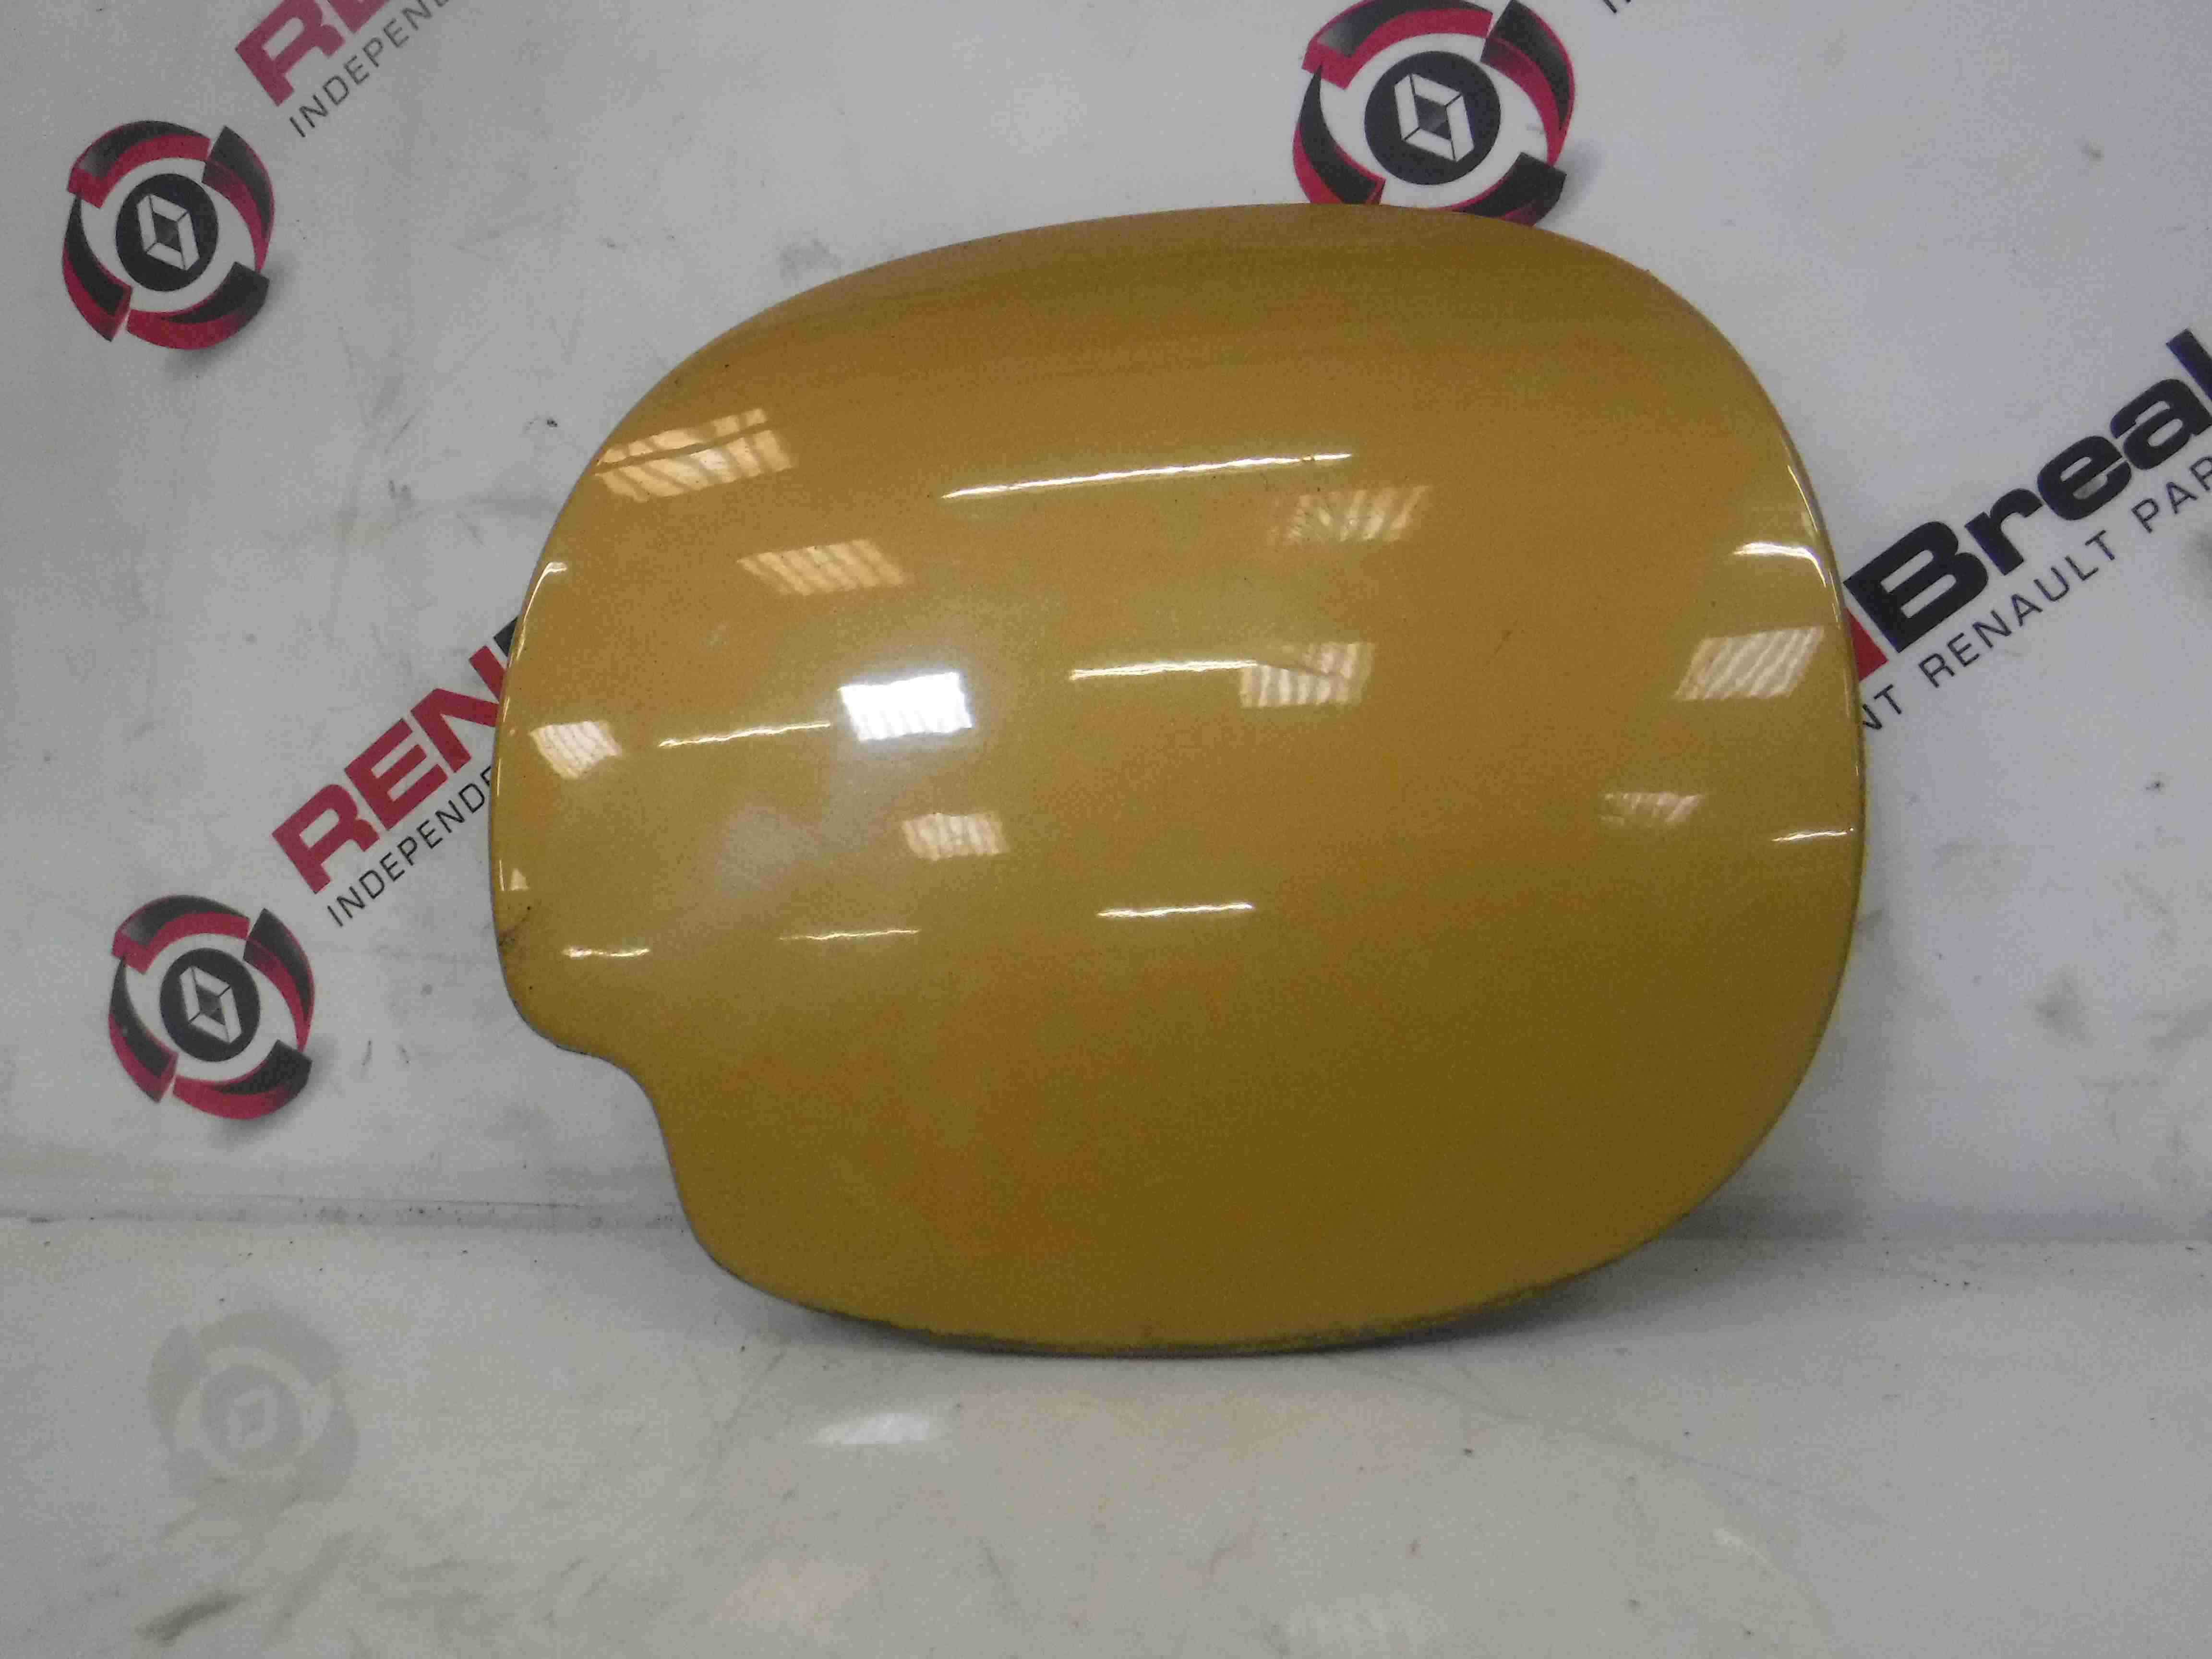 Renault Clio MK2 2001-2006 Fuel Flap Cover Gold Yellow TED30 7700836756